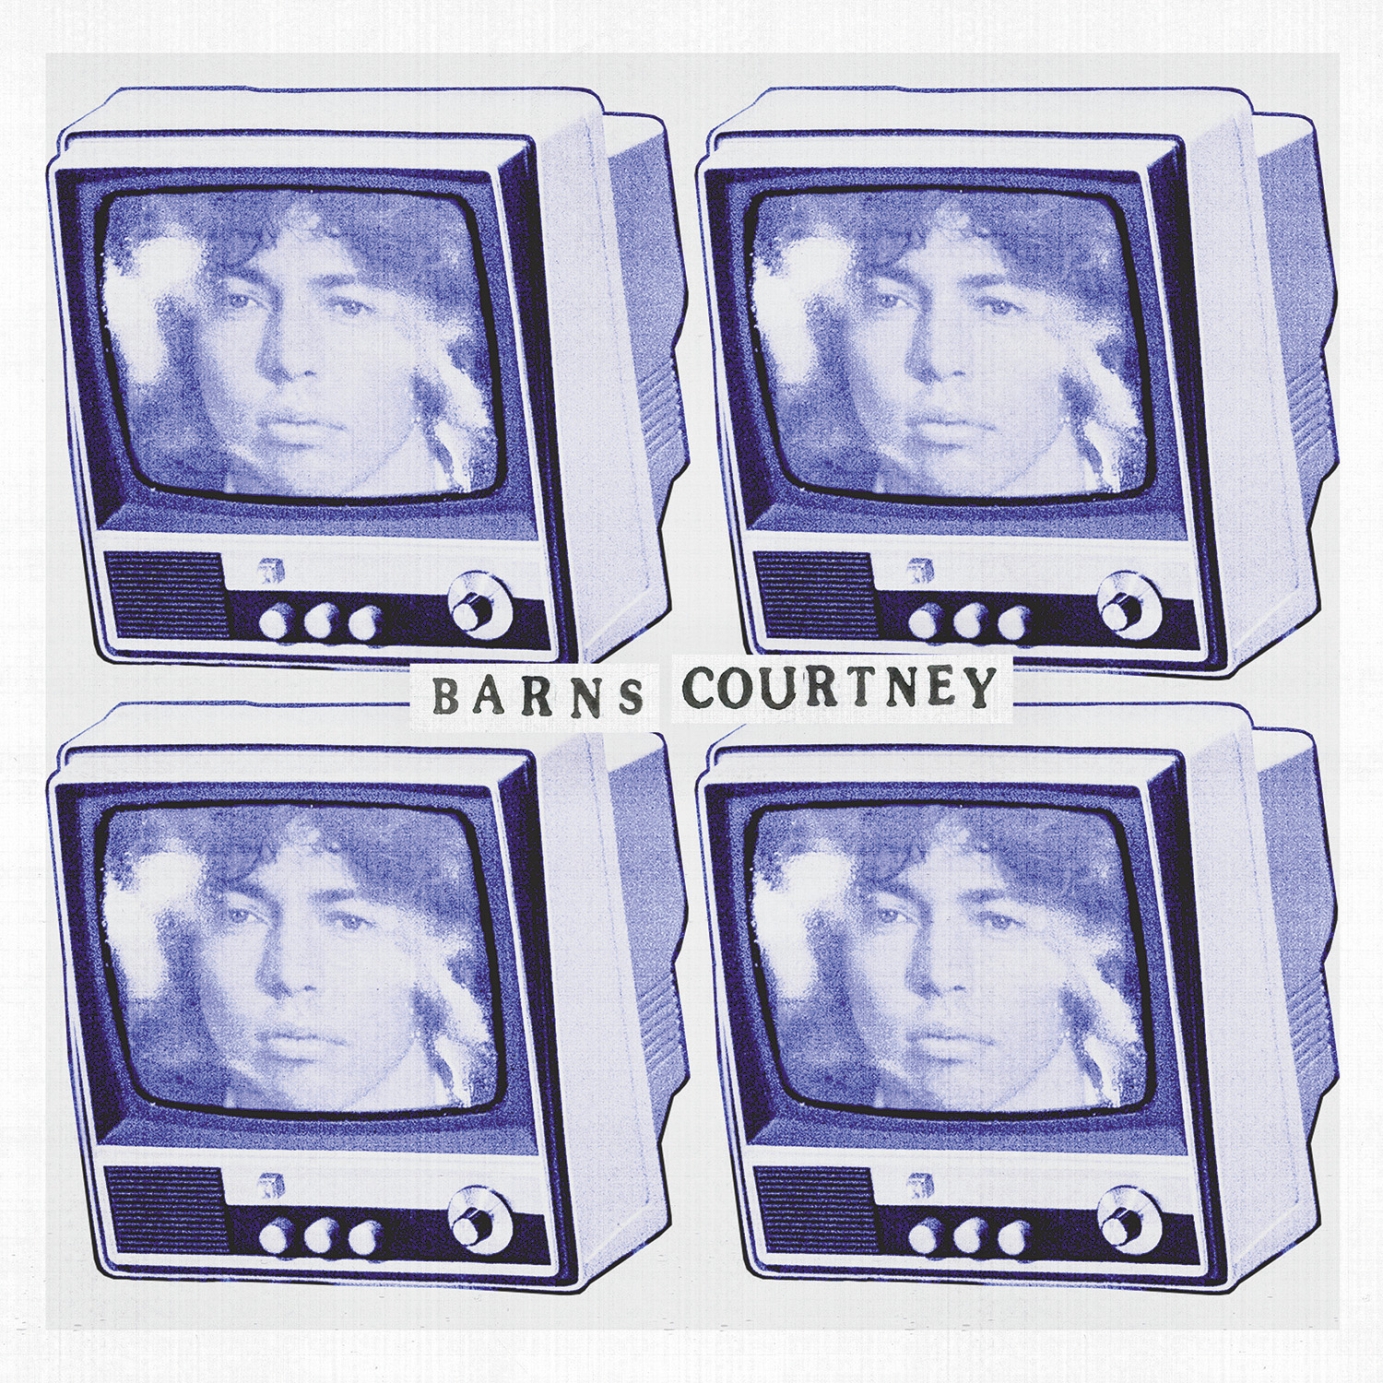 Art direction and Design for Barns Courtney - 99 (Live From The Old Nunnery) 7” Vinyl